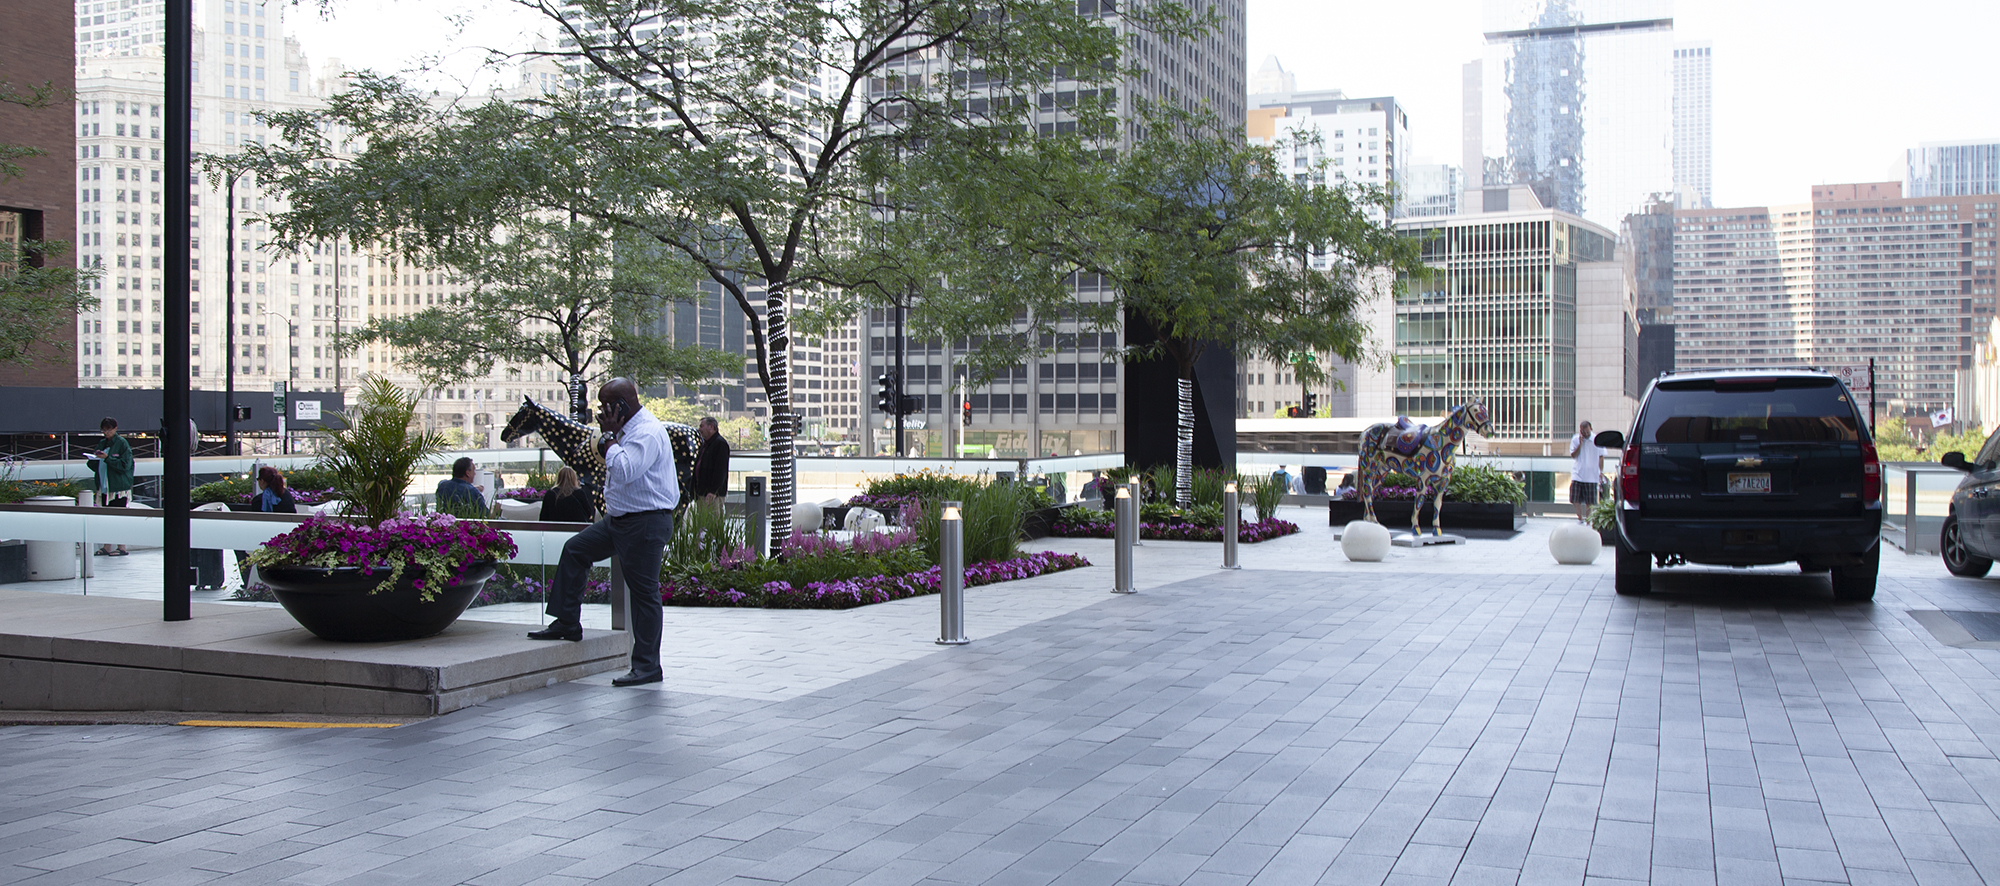 The Hyatt Regency hotel in Chicago features a courtyard with Senzo pavers, lighting, gardens, and a colorful horse sculpture.